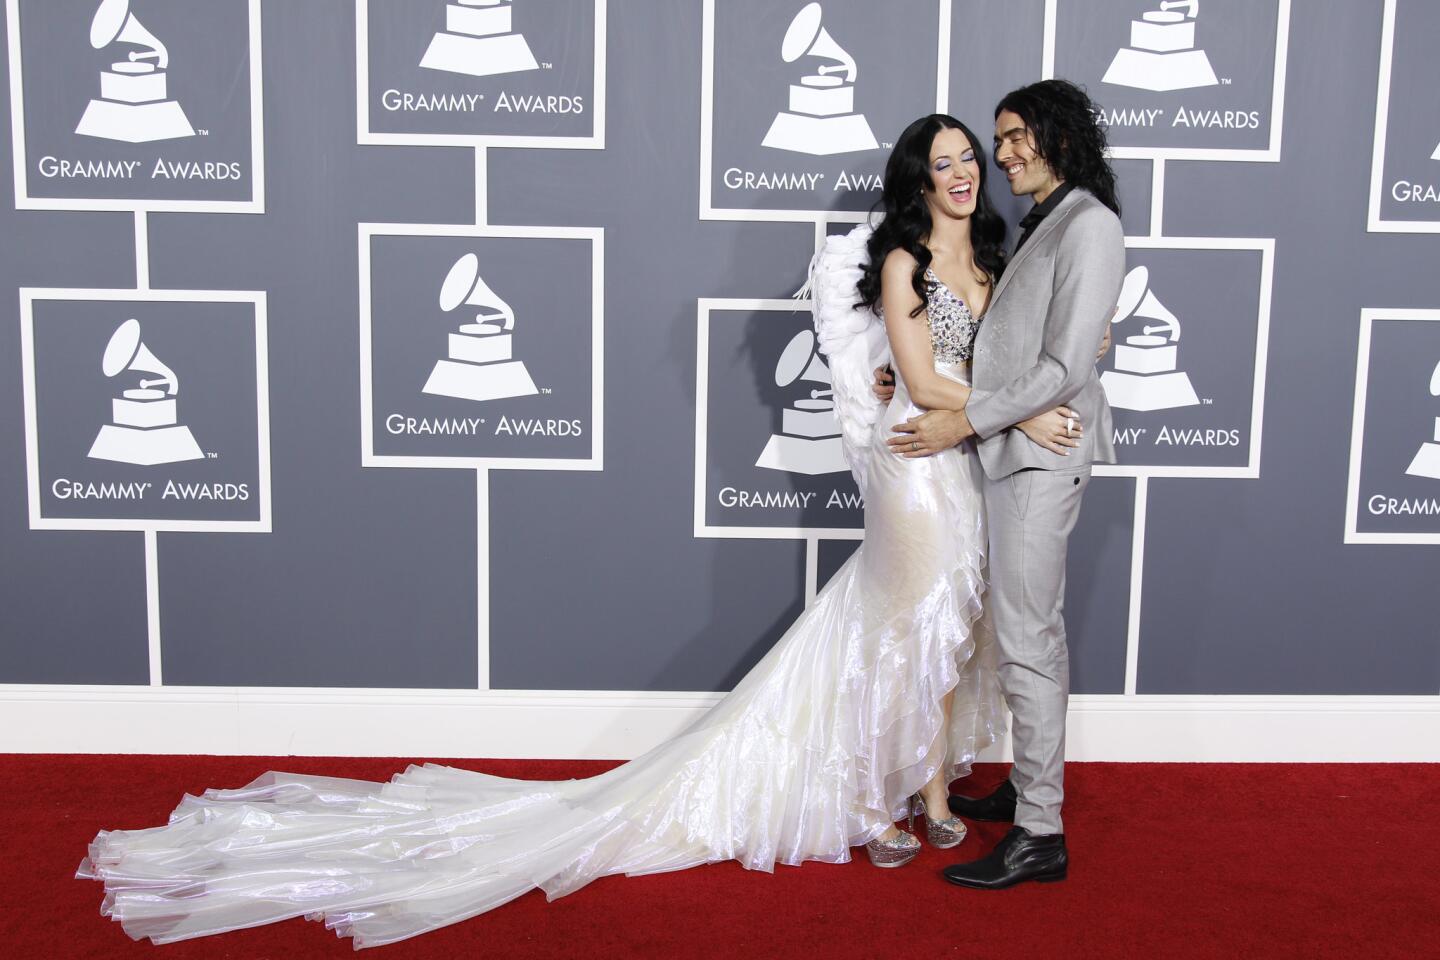 2010: Russell Brand and Katy Perry